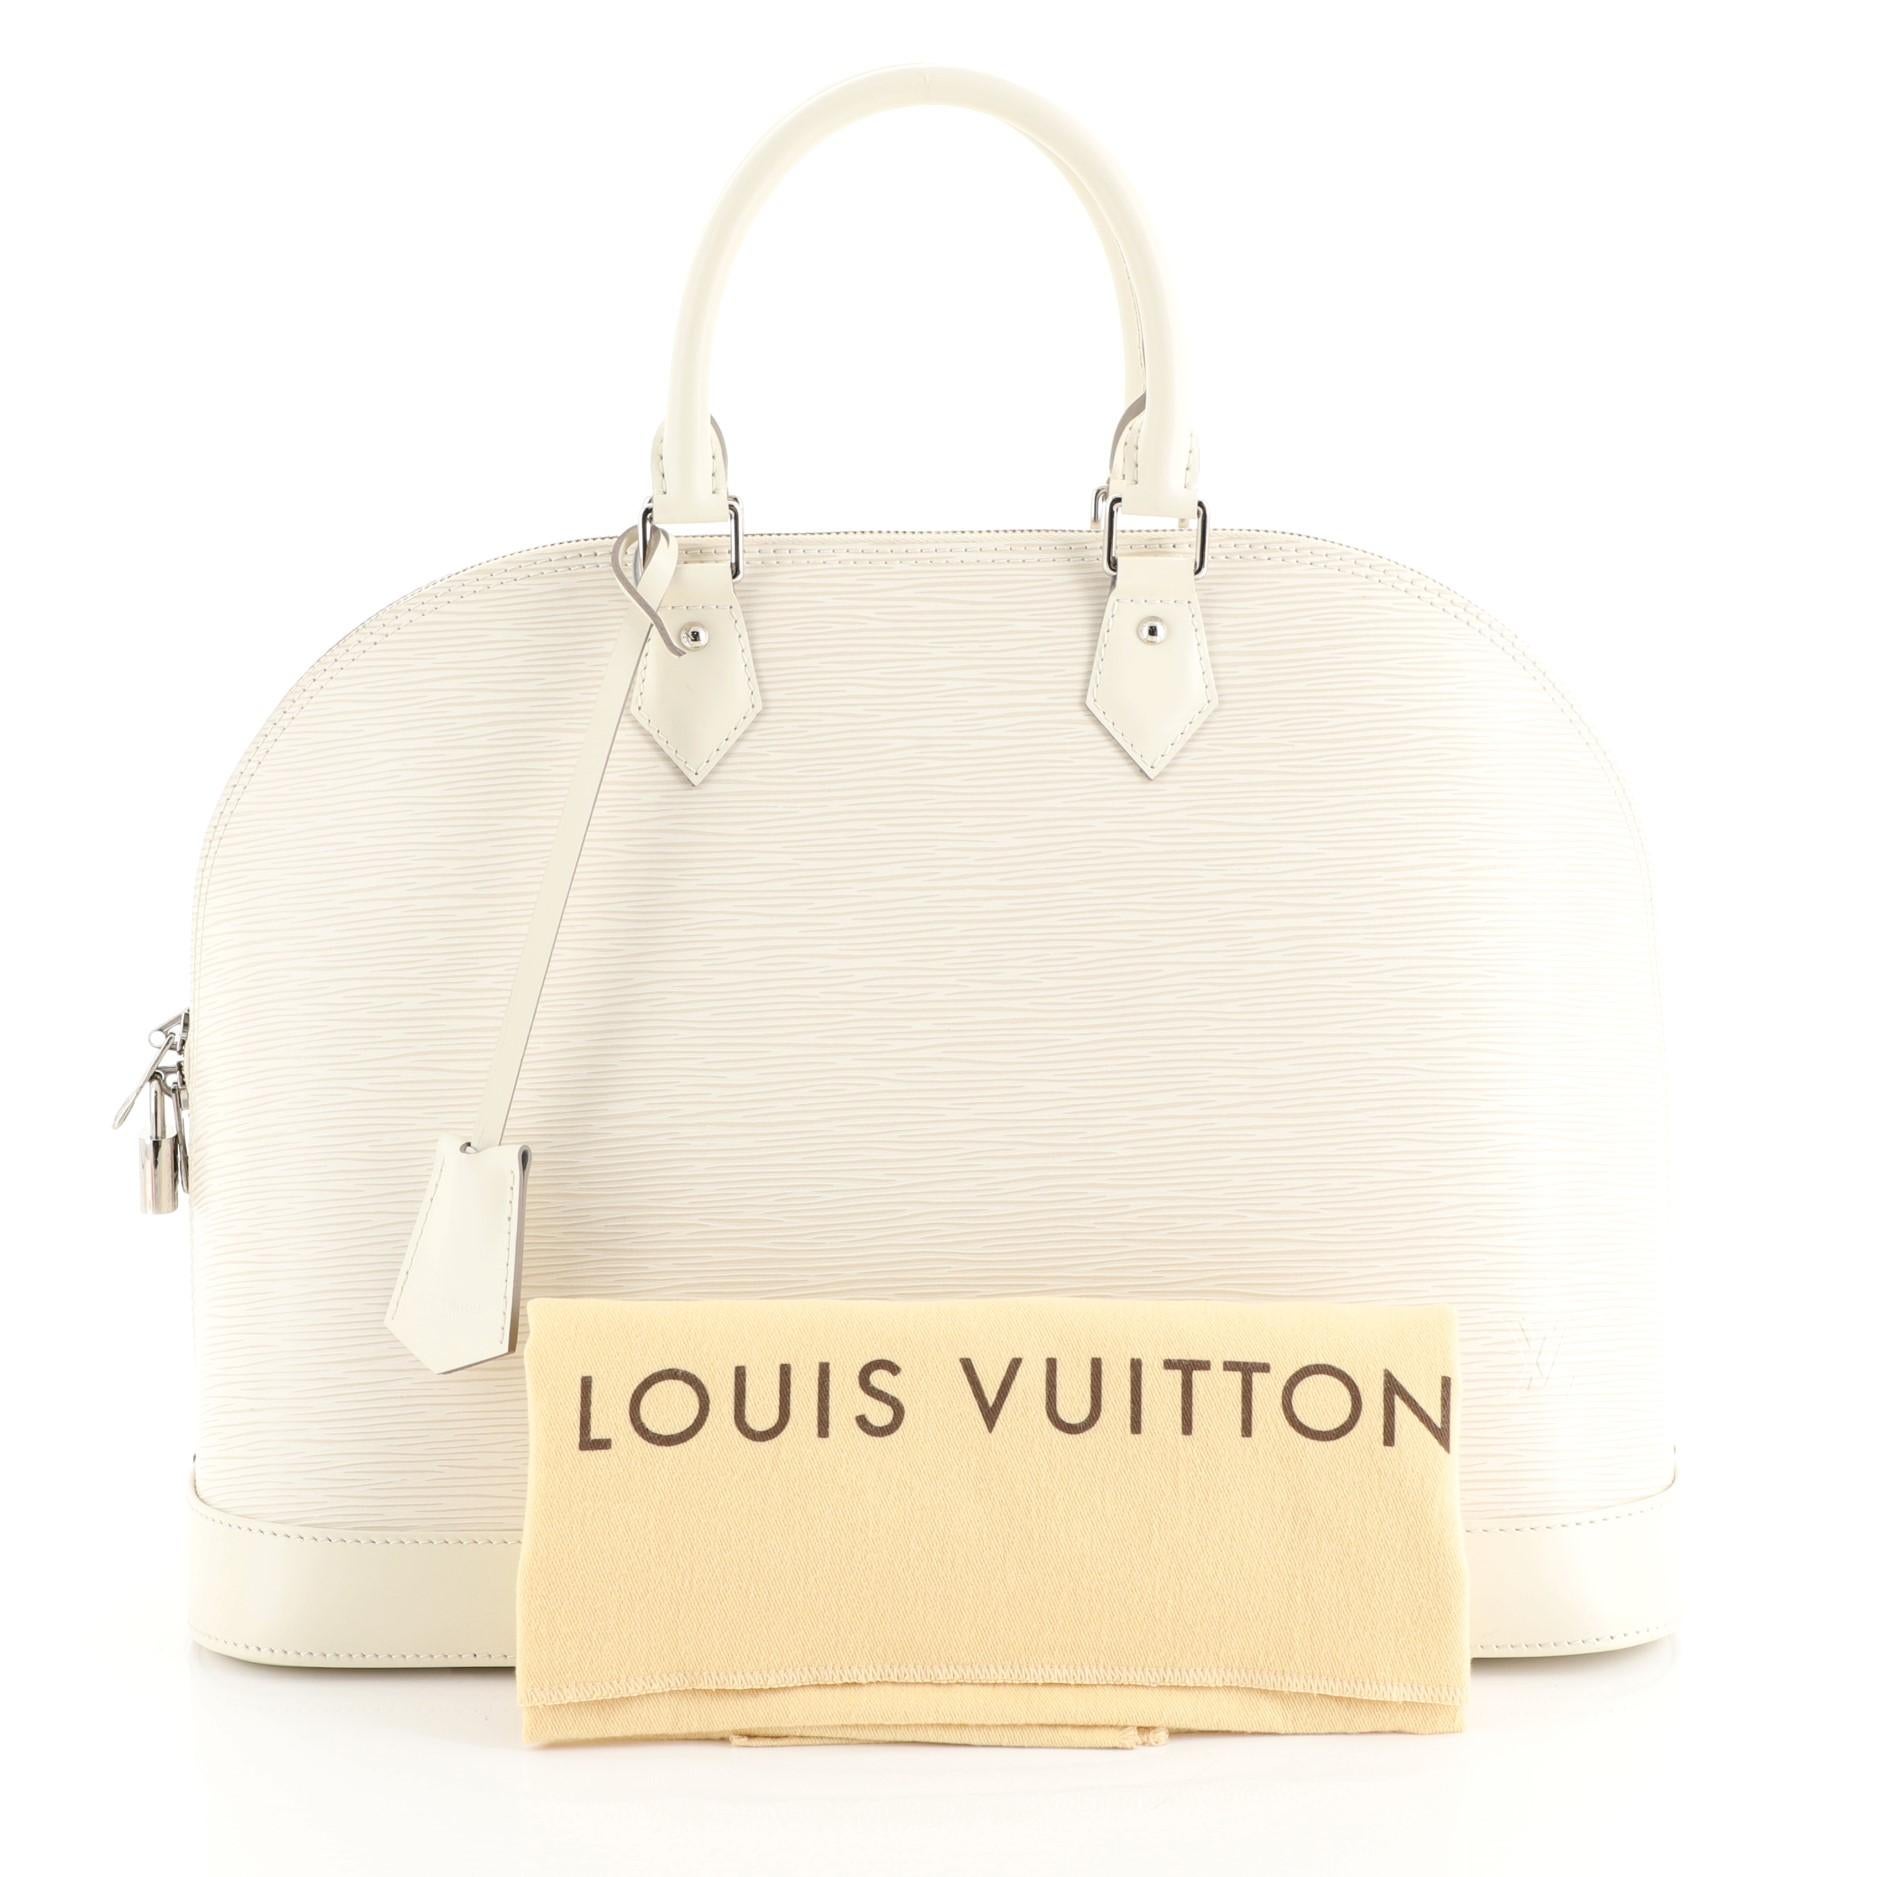 This Louis Vuitton Alma Handbag Epi Leather MM, crafted in white epi leather, features dual rolled handles, protective base studs, and silver-tone hardware. Its all-around zip closure opens to a gray microfiber interior with slip pockets.